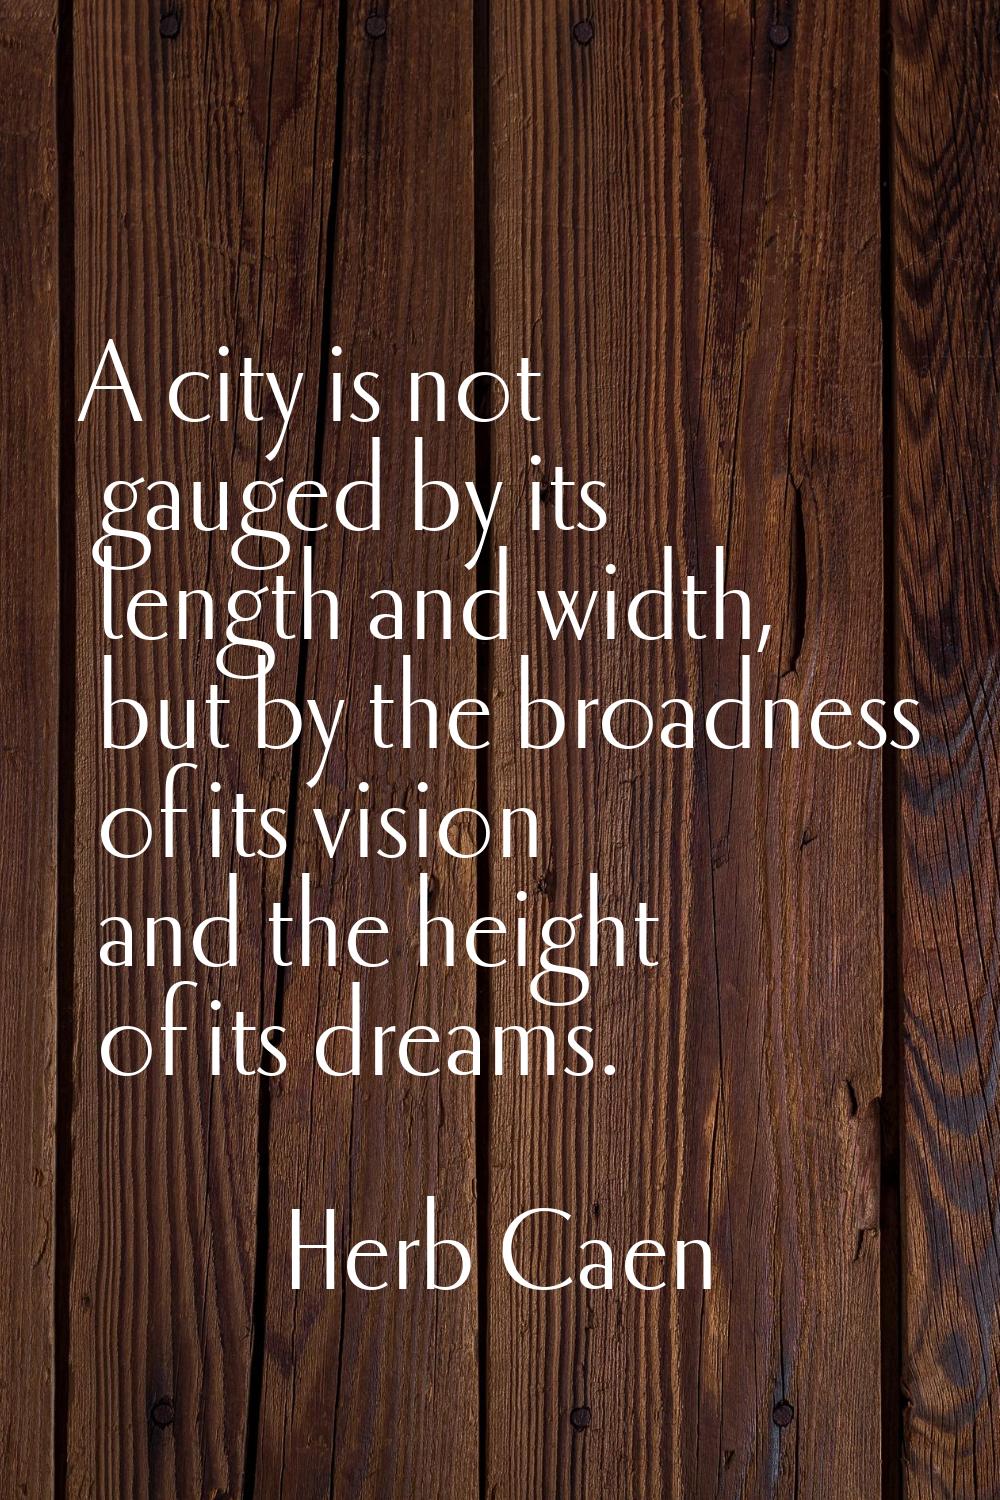 A city is not gauged by its length and width, but by the broadness of its vision and the height of 